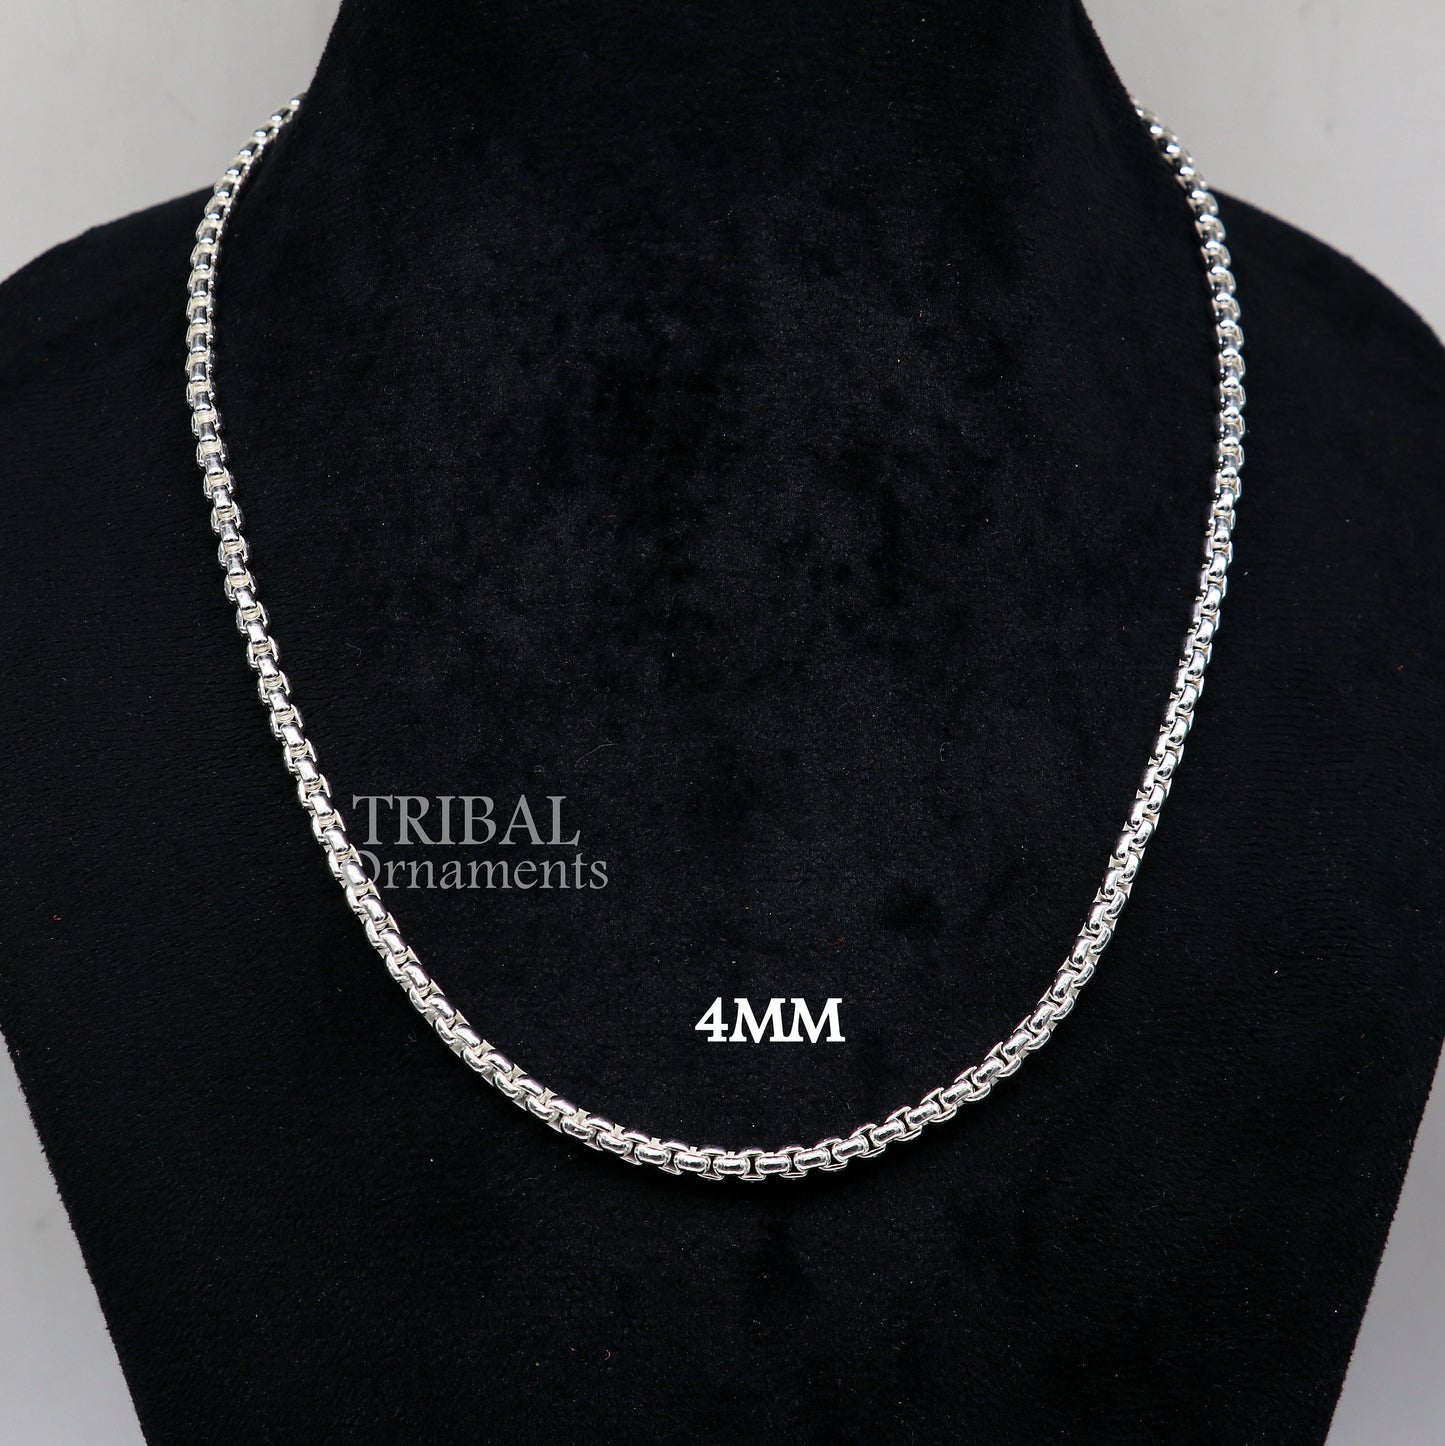 4mm 925 sterling silver handmade amazing stylish delicate solid Rolo high quality chains necklace, best gifting unisex necklace chain ch222 - TRIBAL ORNAMENTS